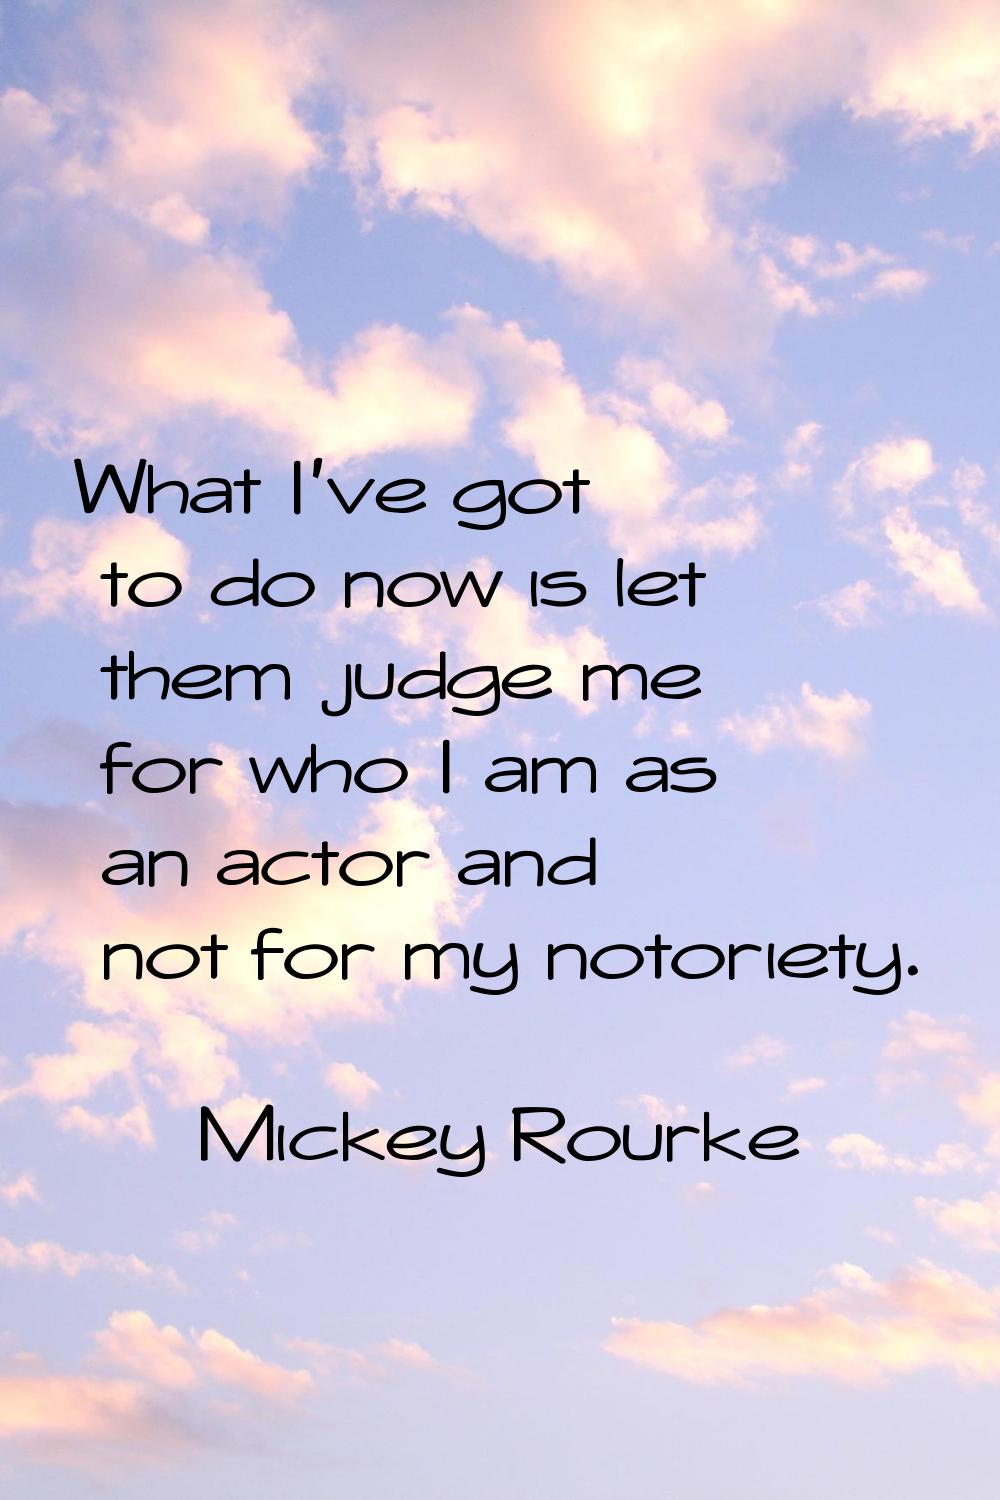 What I've got to do now is let them judge me for who I am as an actor and not for my notoriety.